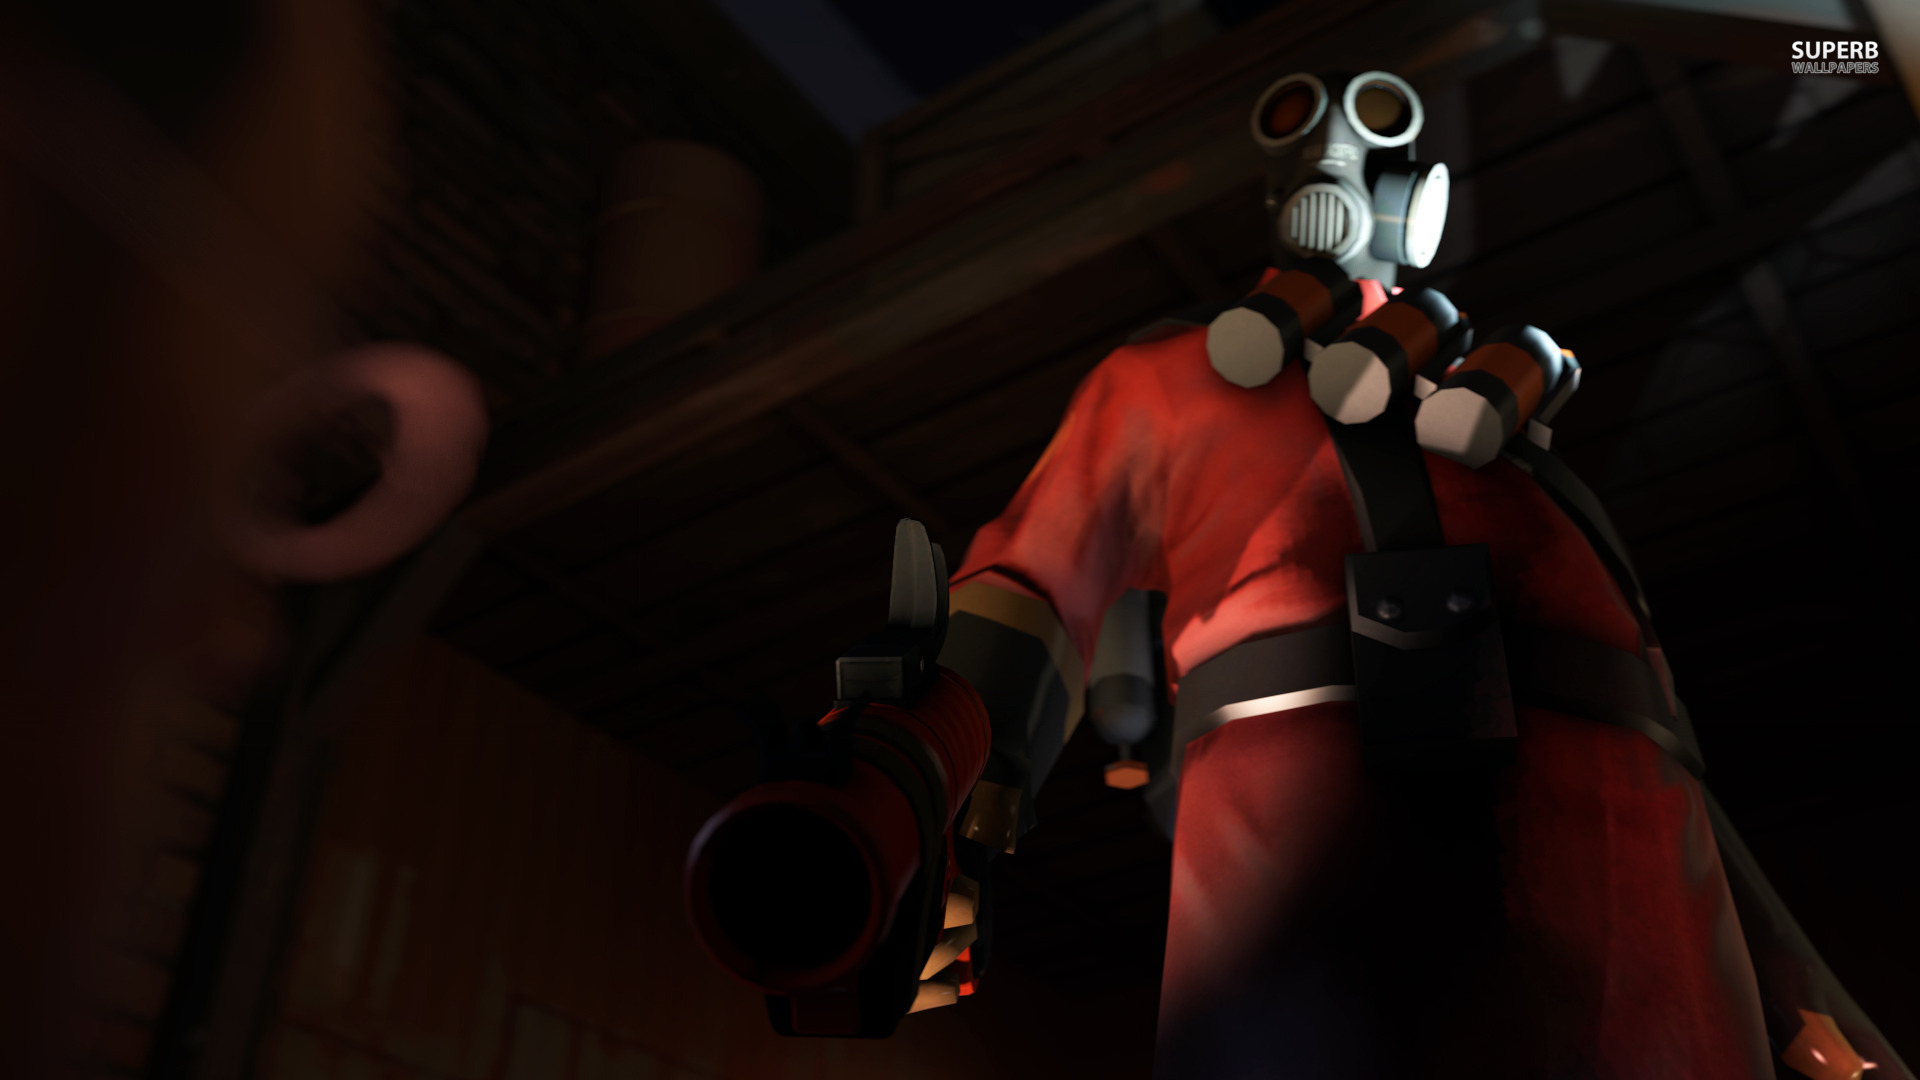 Team Fortress 2 wallpaper - Game wallpapers -